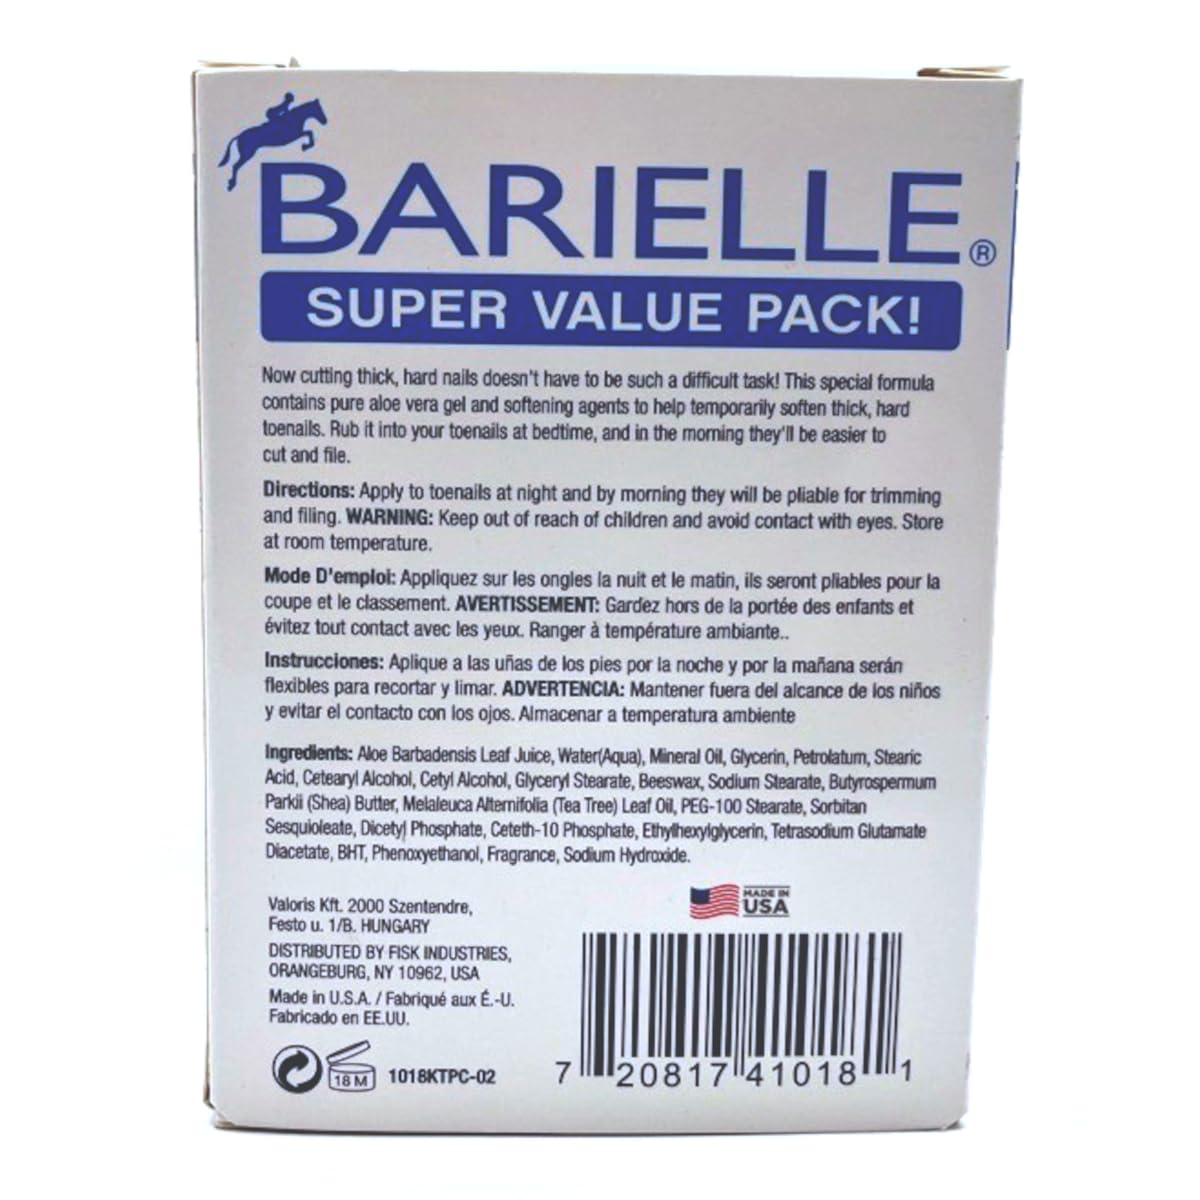 Barielle Toenail Softening Cream 1.18 oz. 2-PC BOXED SET with Barille Nail Clippers